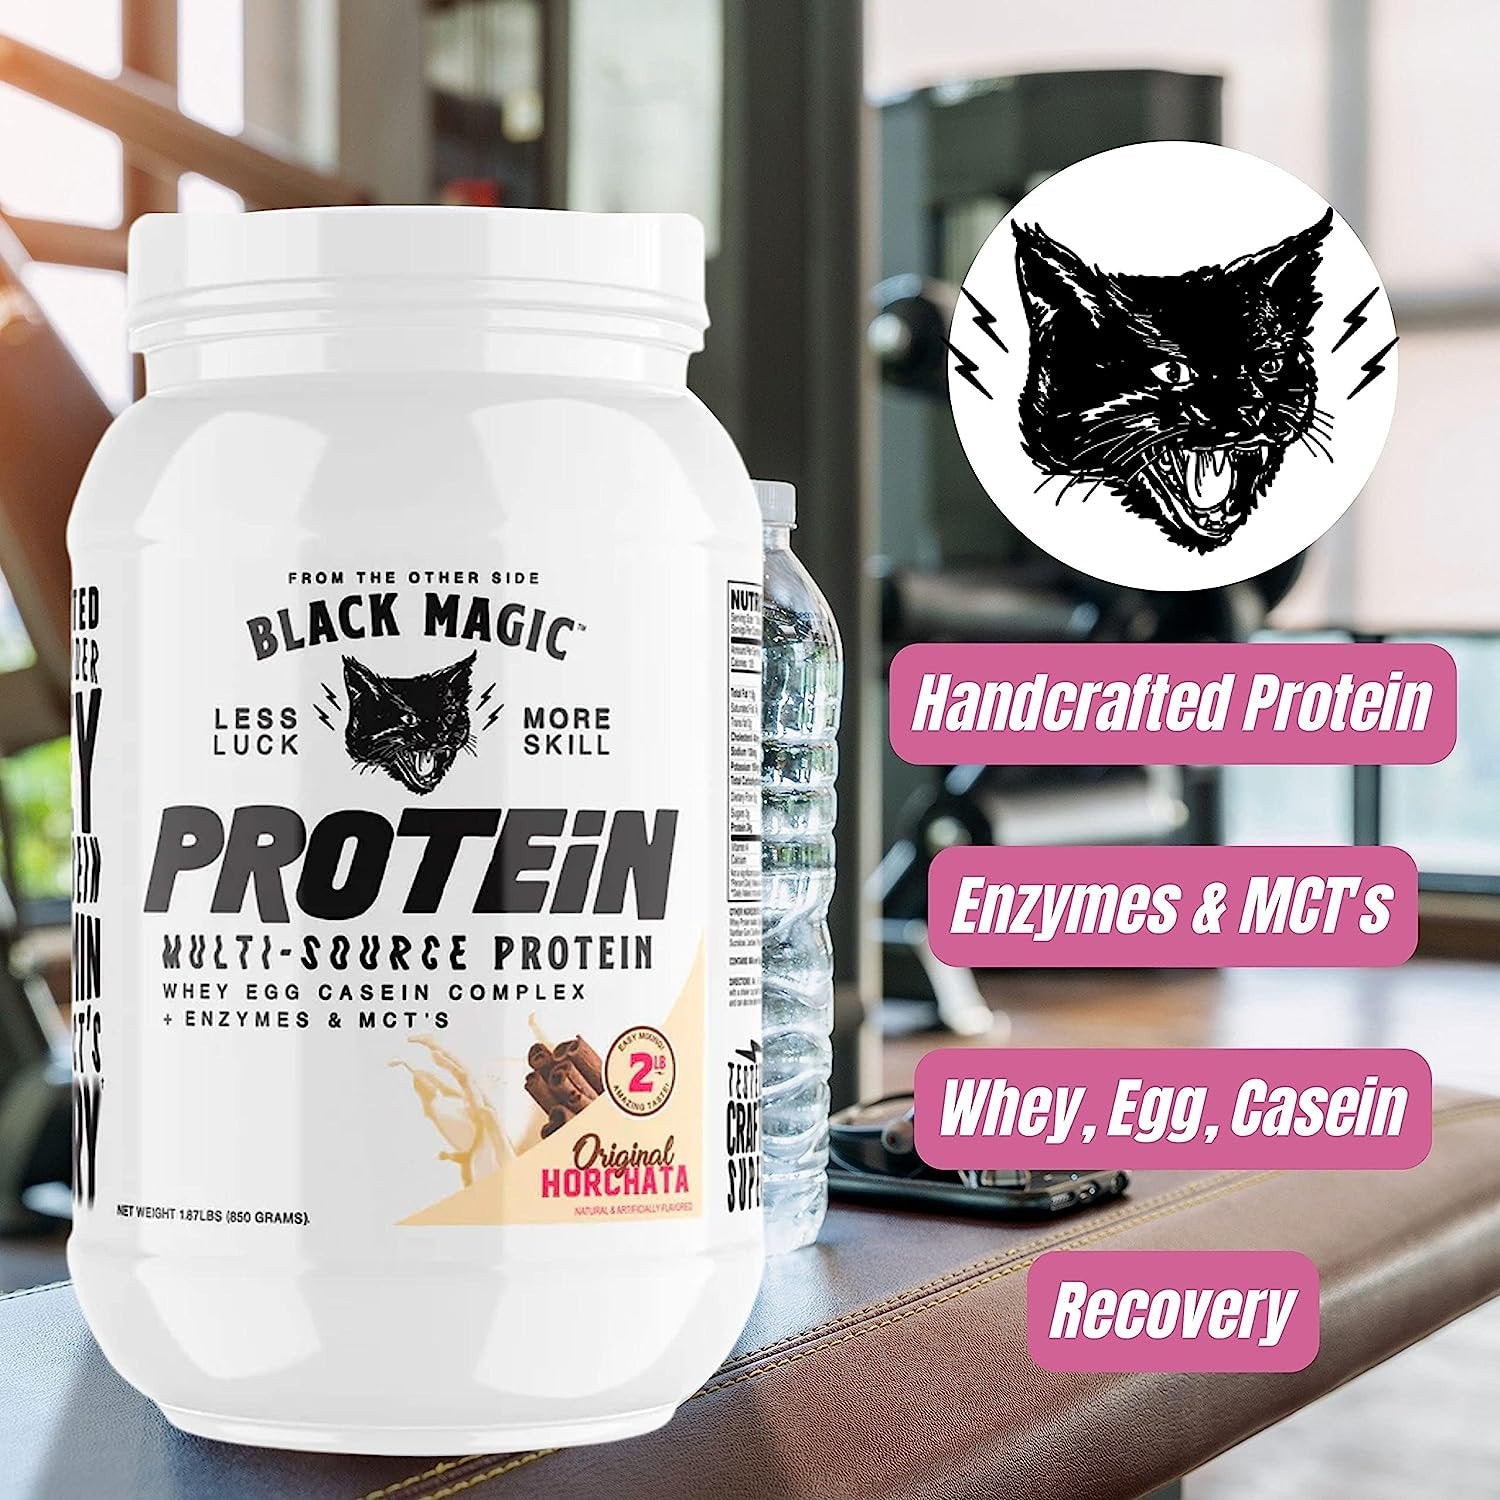 Horchata Black Magic Multi-Source Protein - Whey, Egg, and Casein Complex with Enzymes & MCT Powder - Pre Workout and Post Workout - 24g Protein - 2 LB with Bonus Key Chain